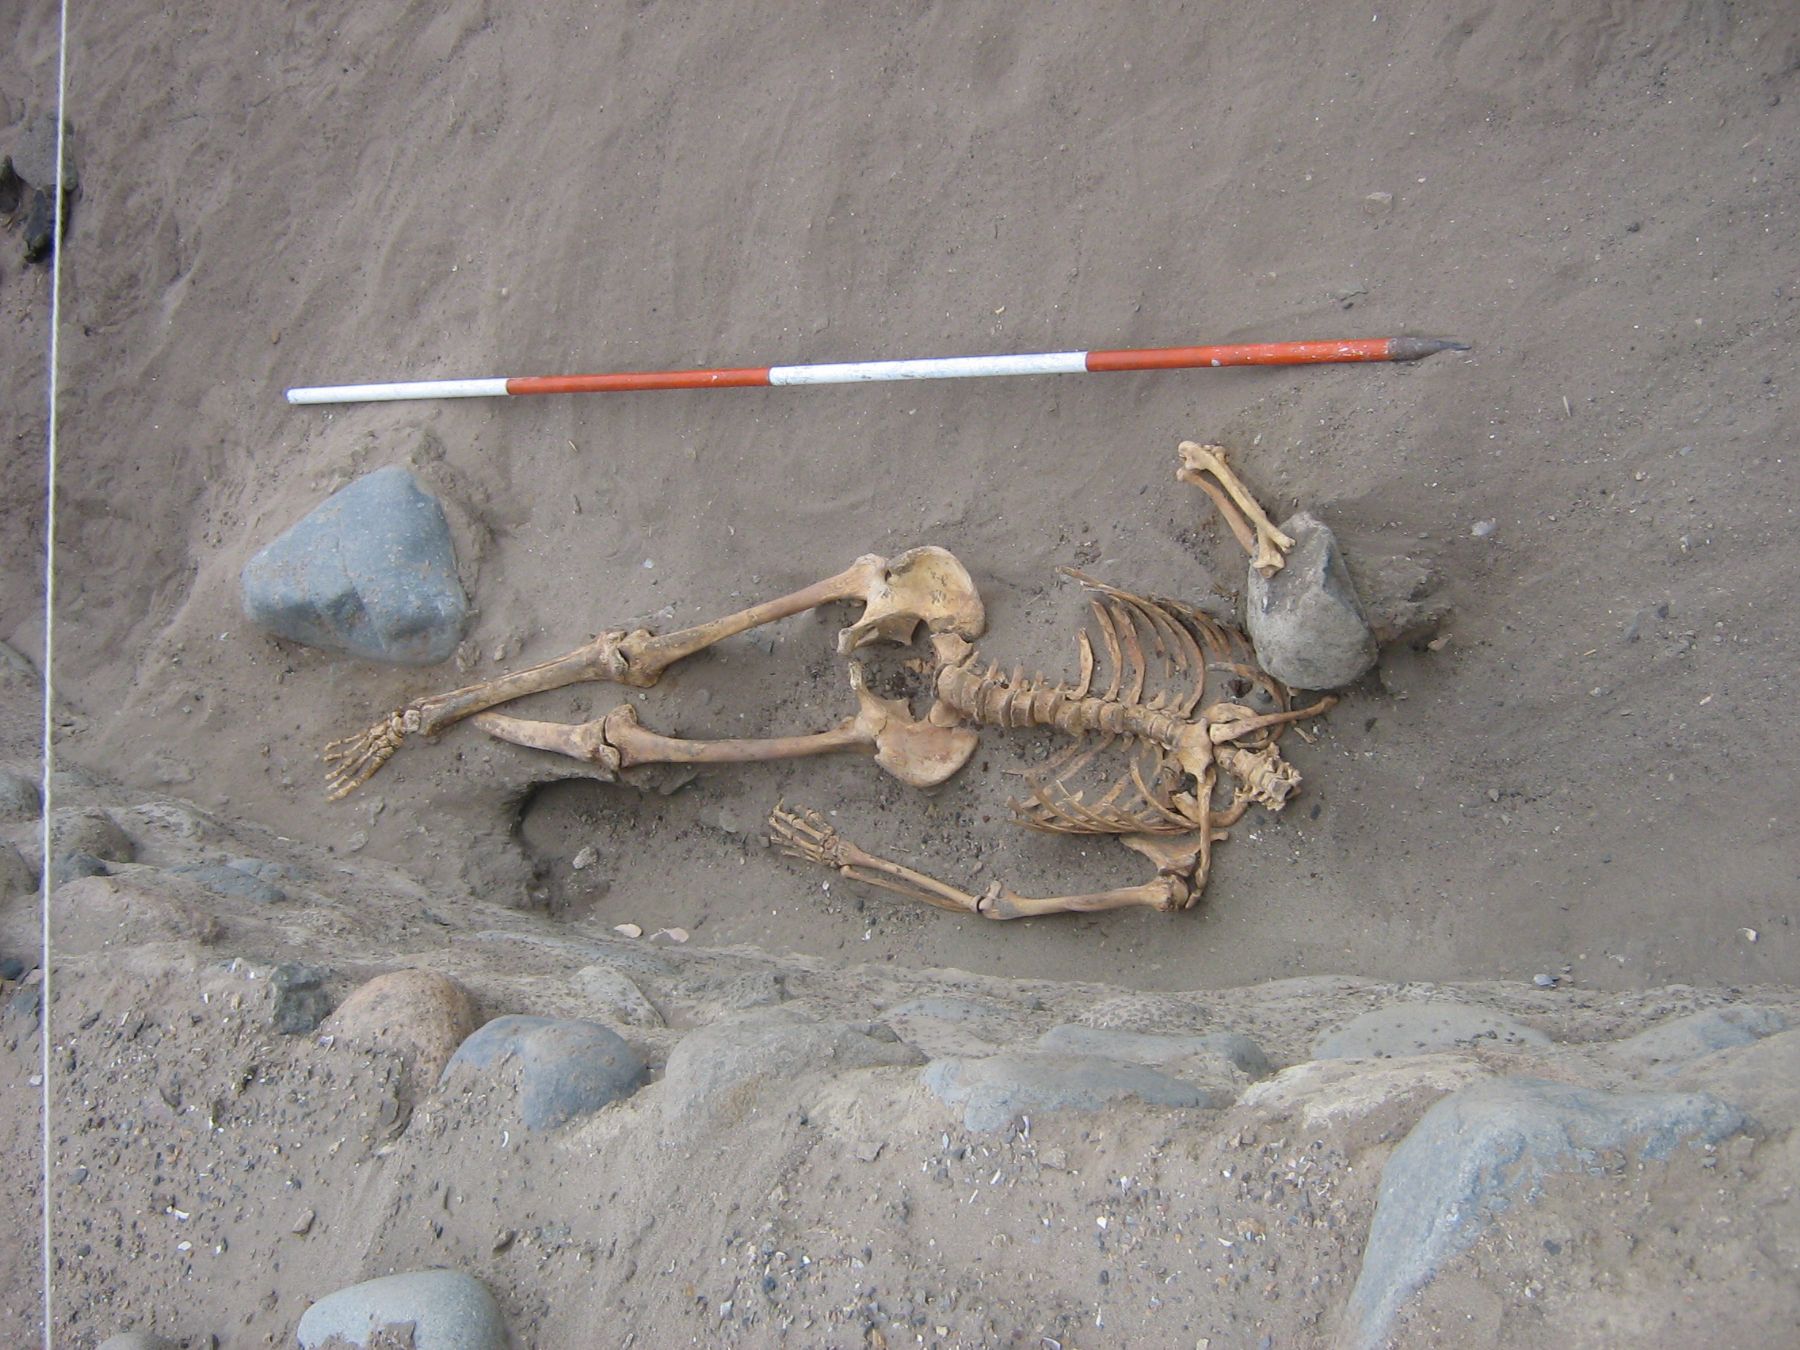 Human sacrifice remains are found at Bandurria archaeological site